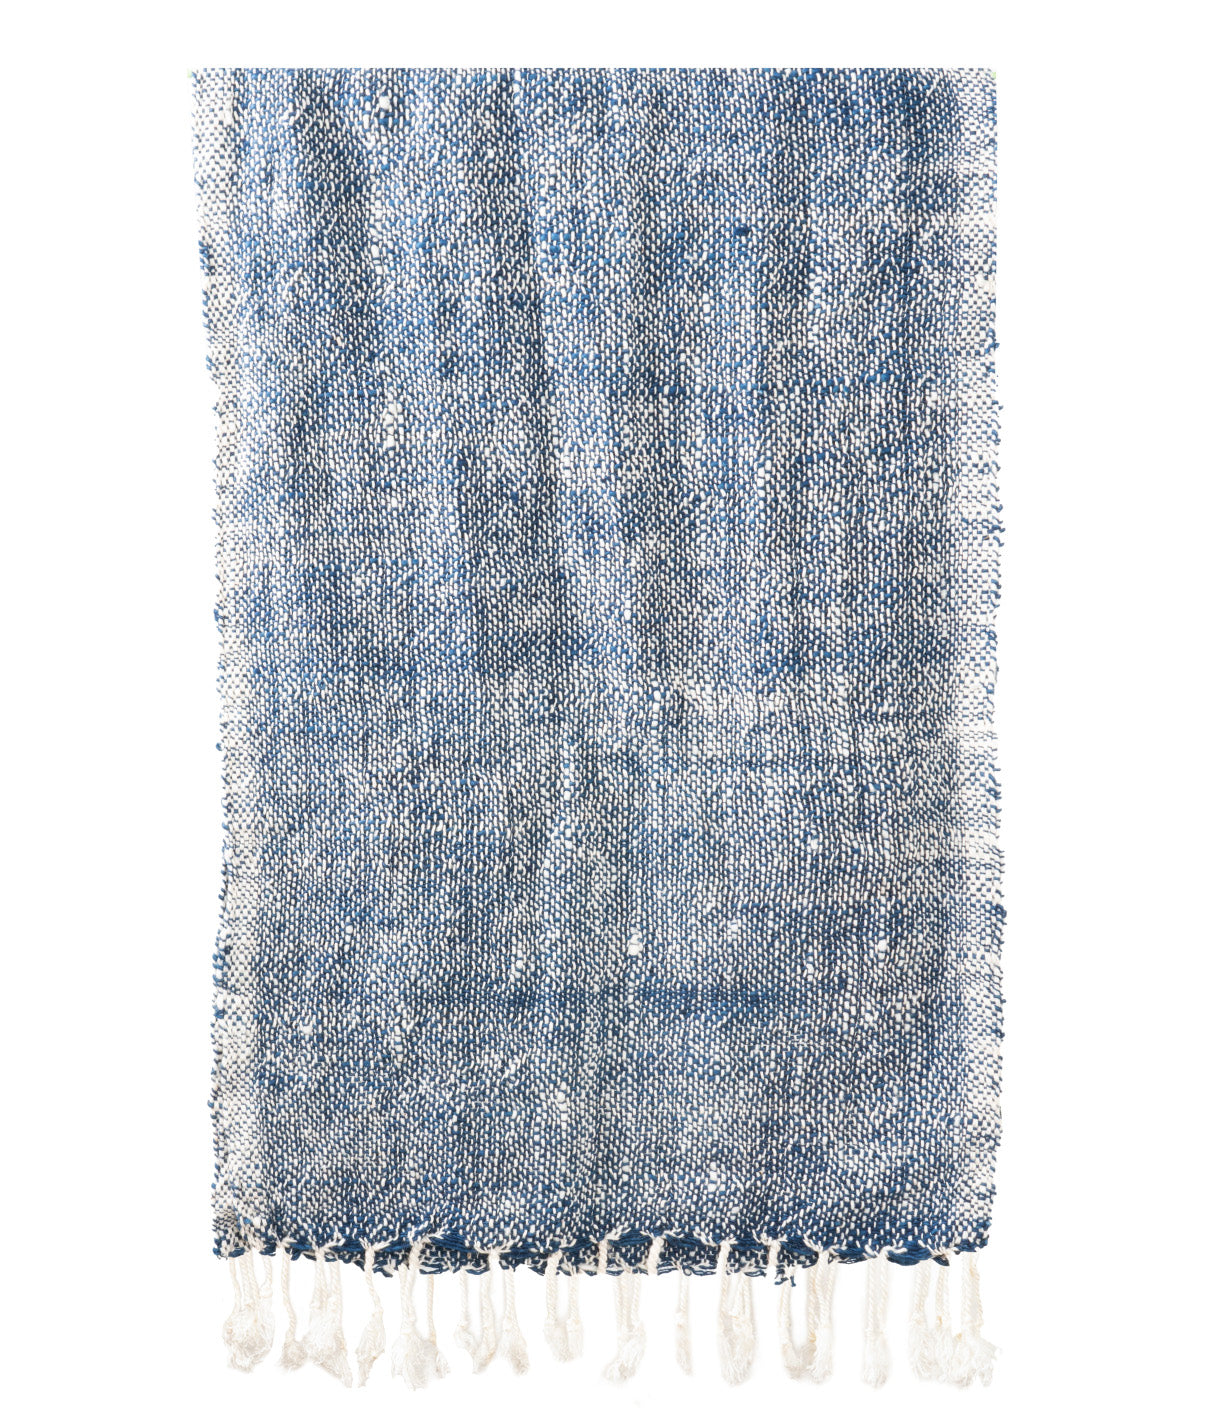 Natural Dyed Handspun Handwoven Cotton Scarf & Shawls - CCCollections